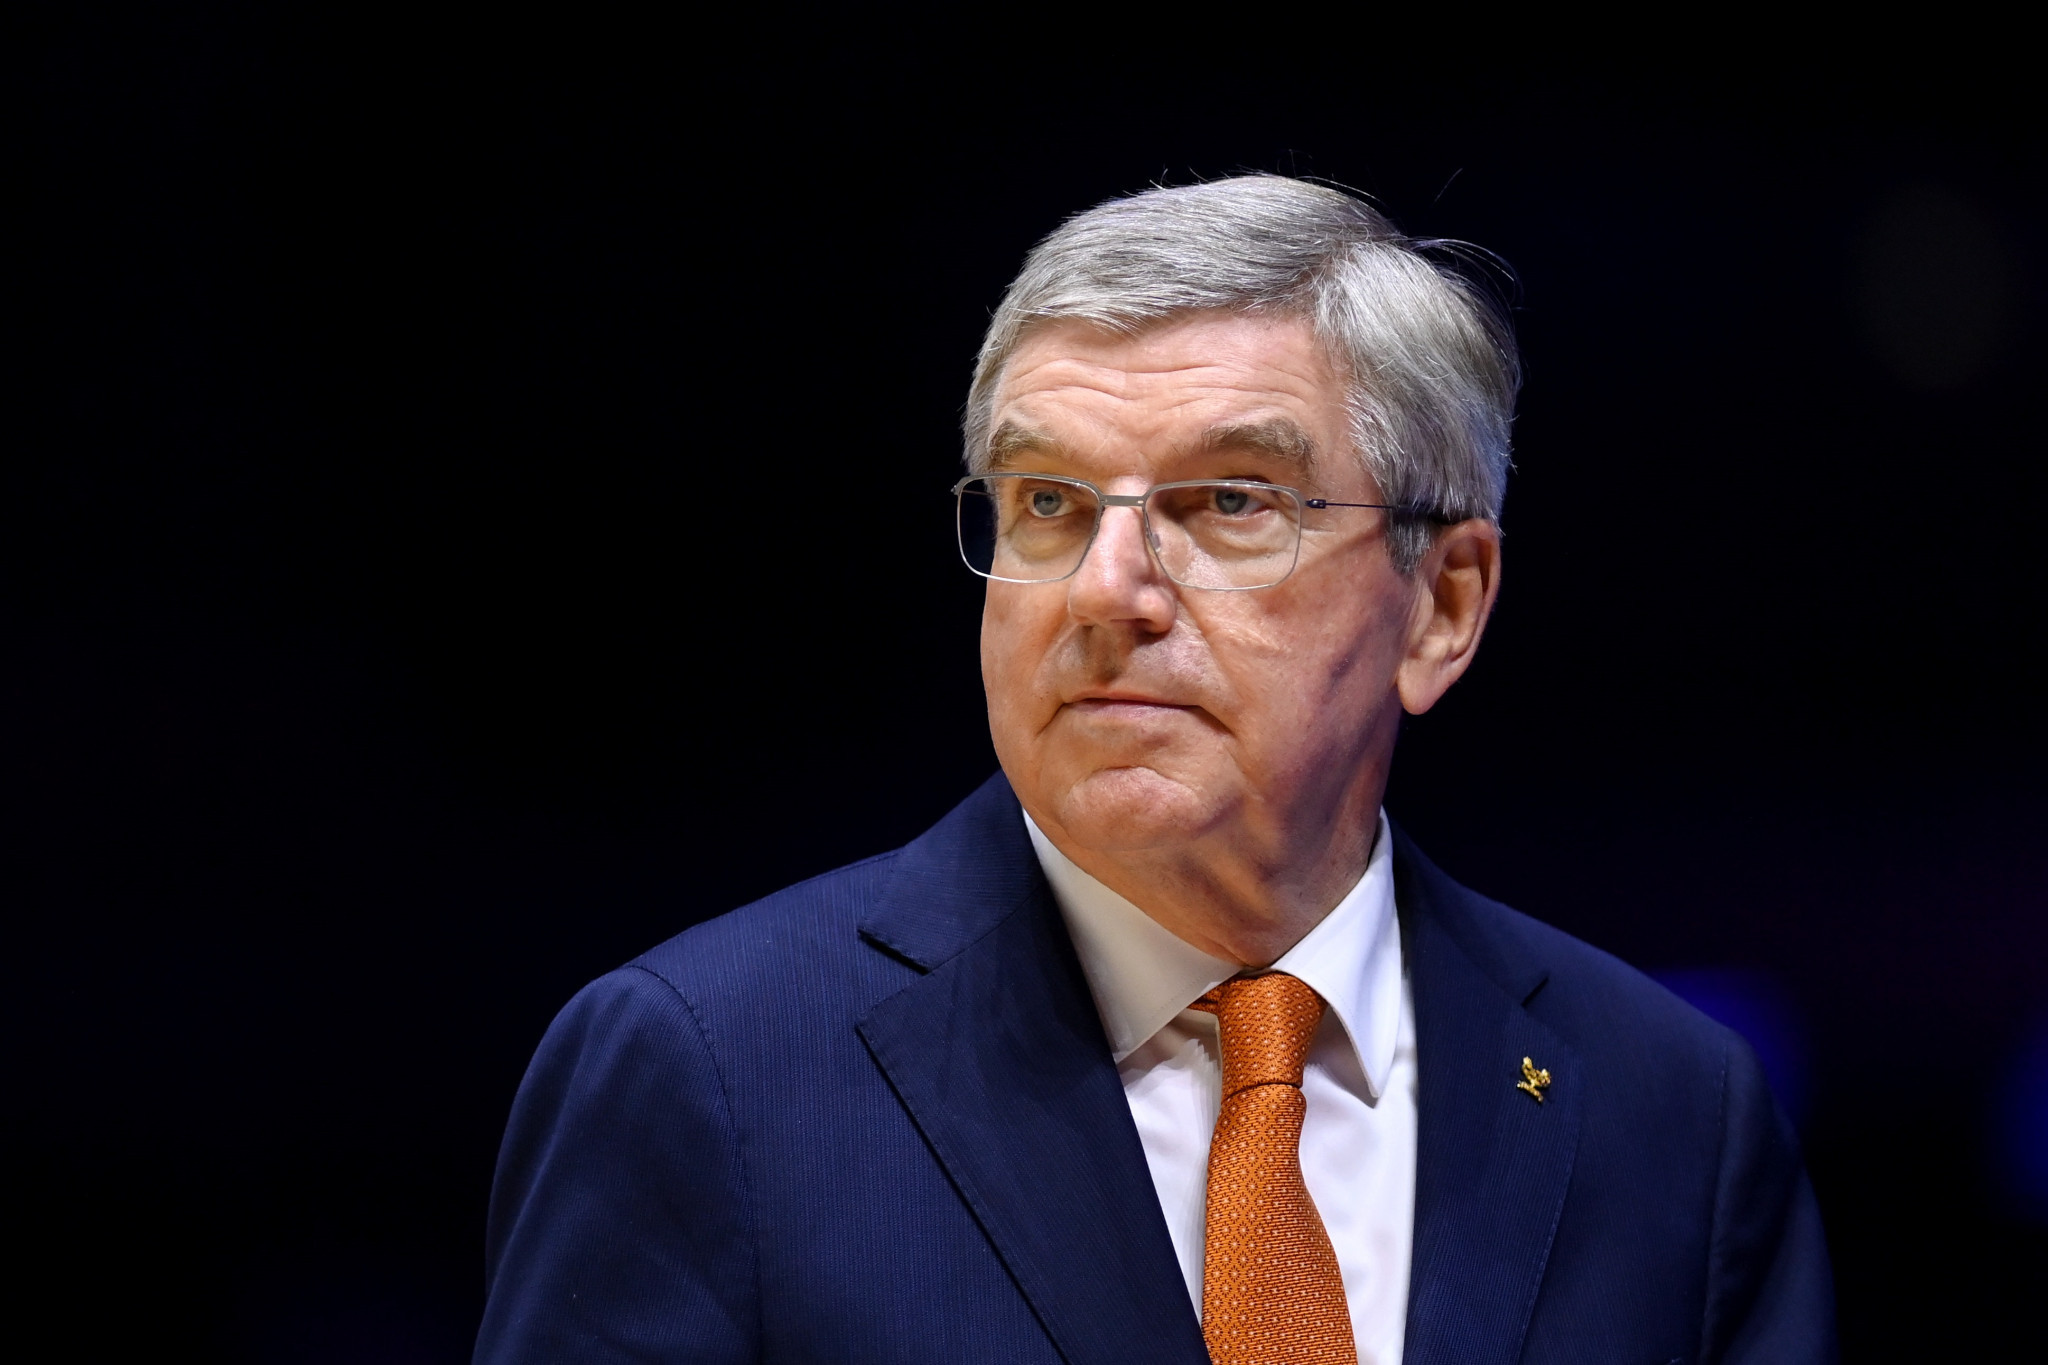 IOC President Thomas Bach is set to speak at the IF Forum in Lausanne ©Getty Images